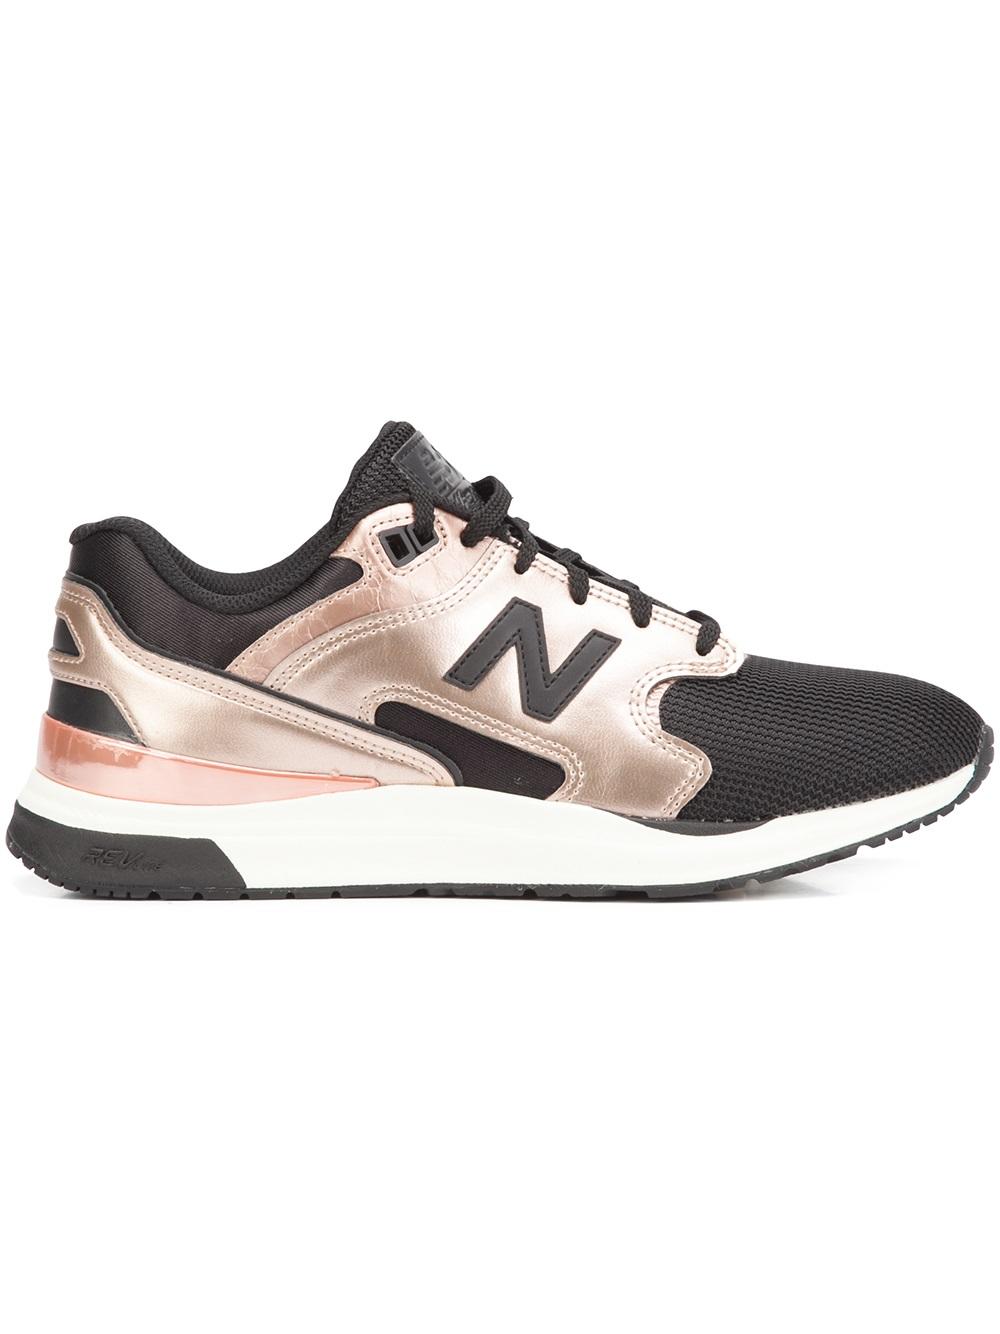 chaussure new balance magasin paris, New Balance '1550' sneakers Femme Chaussures,new balance soldes,Vente,Outlet